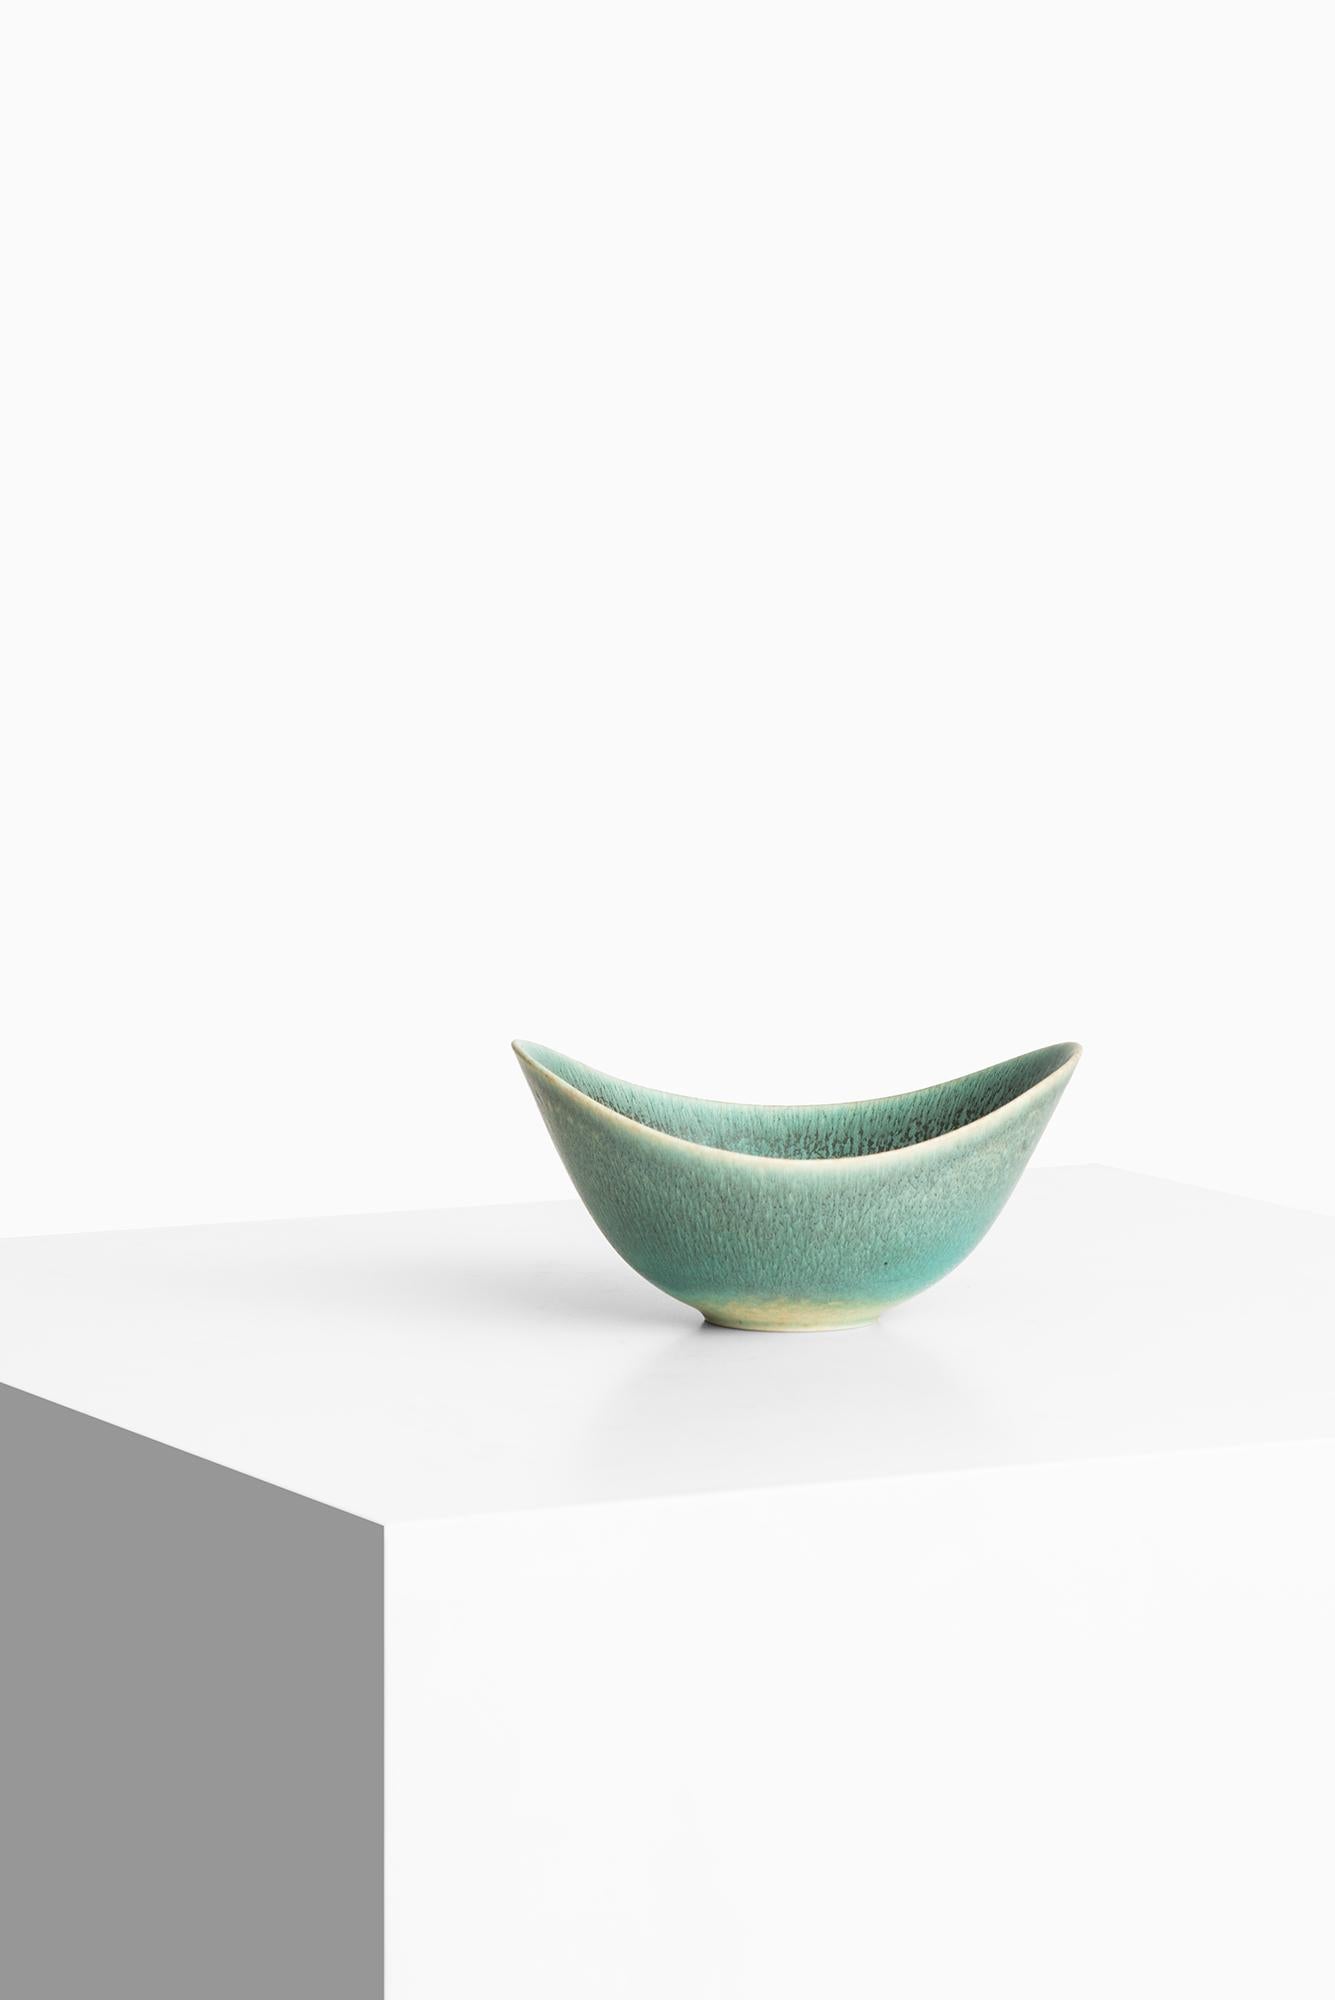 Ceramic bowl model ARO designed by Gunnar Nylund. Produced by Rörstrand in Sweden.